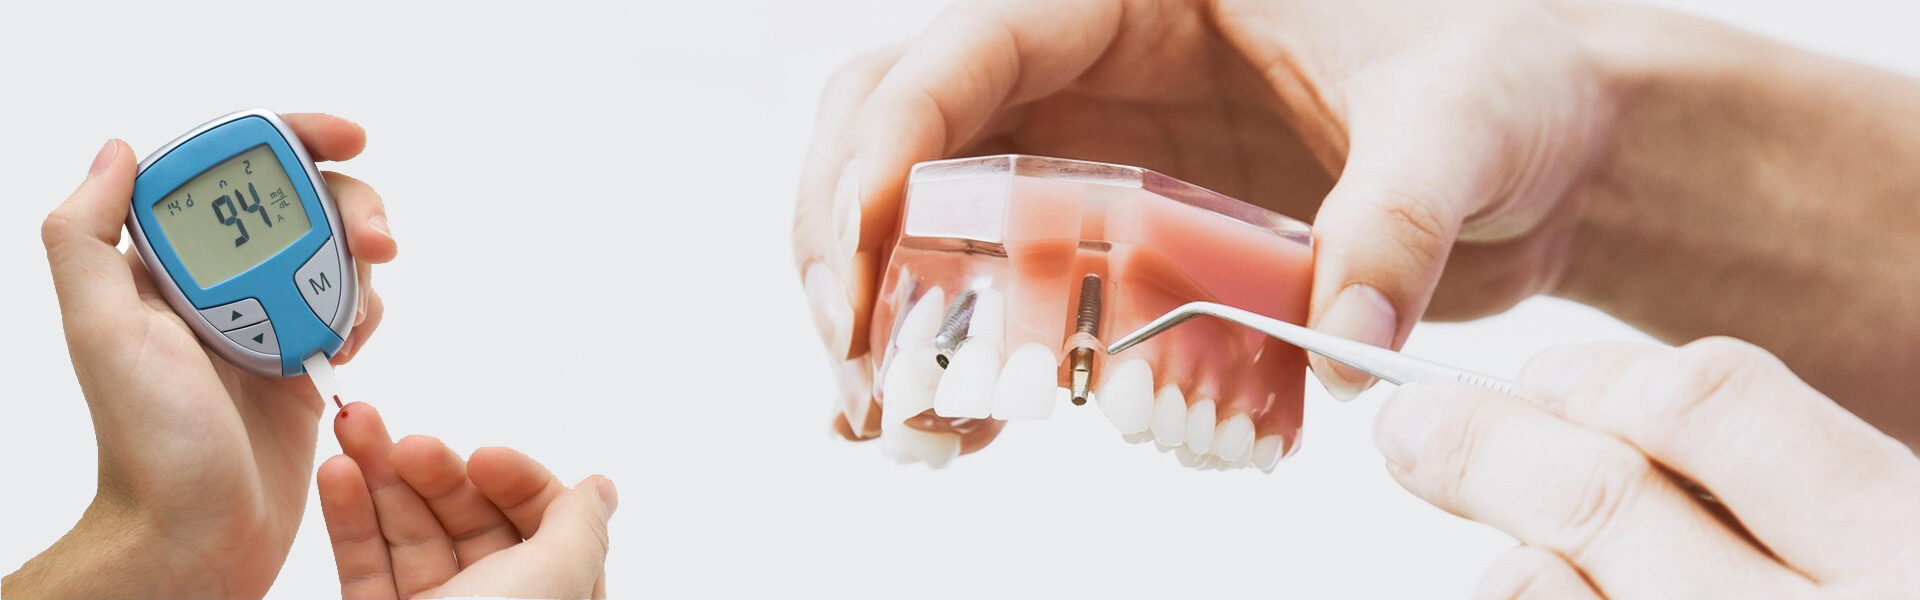 Diabetes and Dental implant